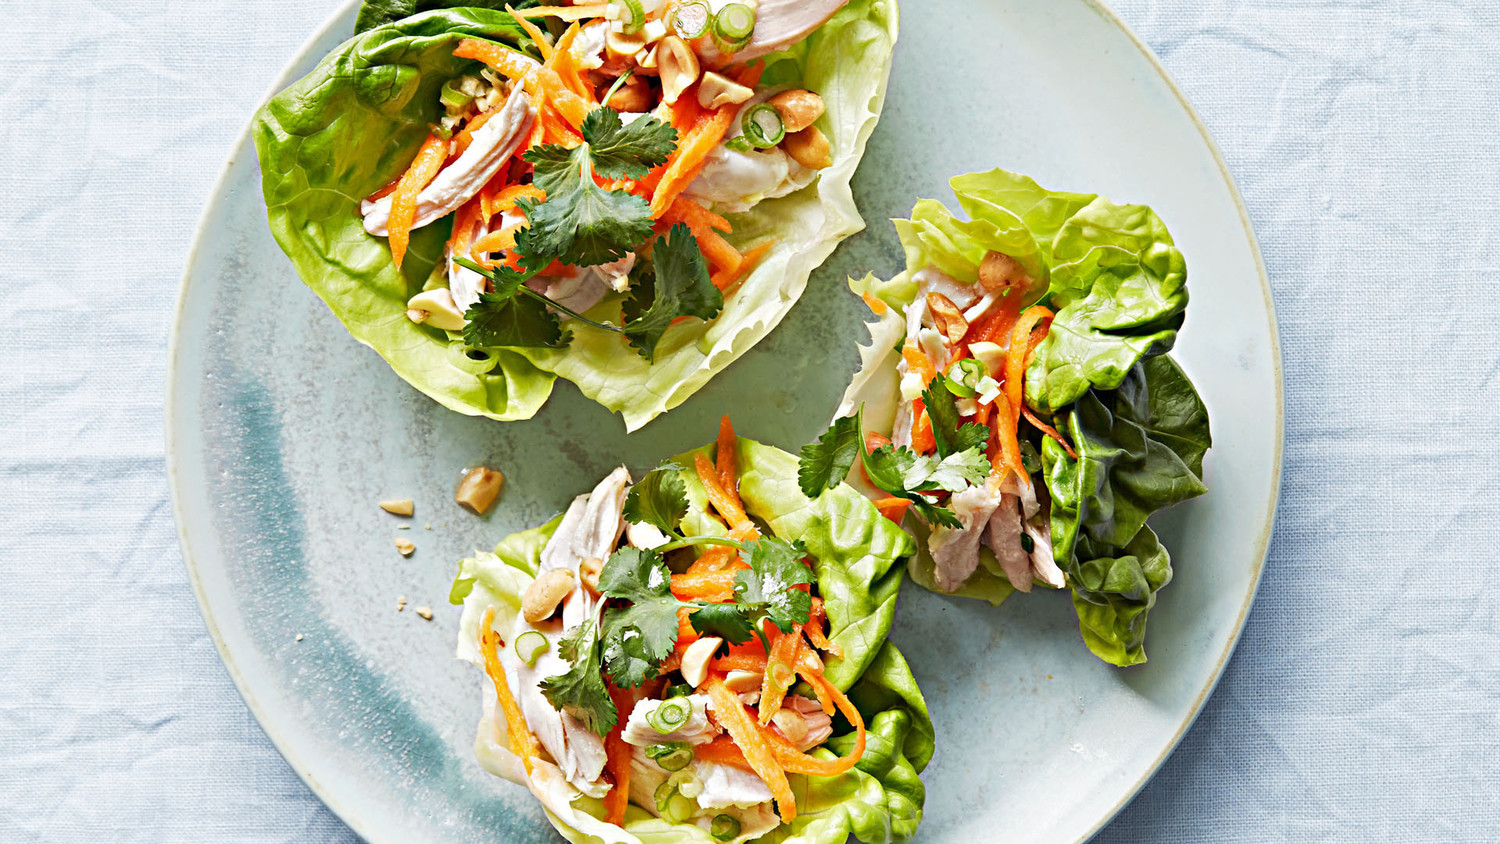 Try This Chicken Salad Revamp For a Healthy Dinner | Martha Stewart